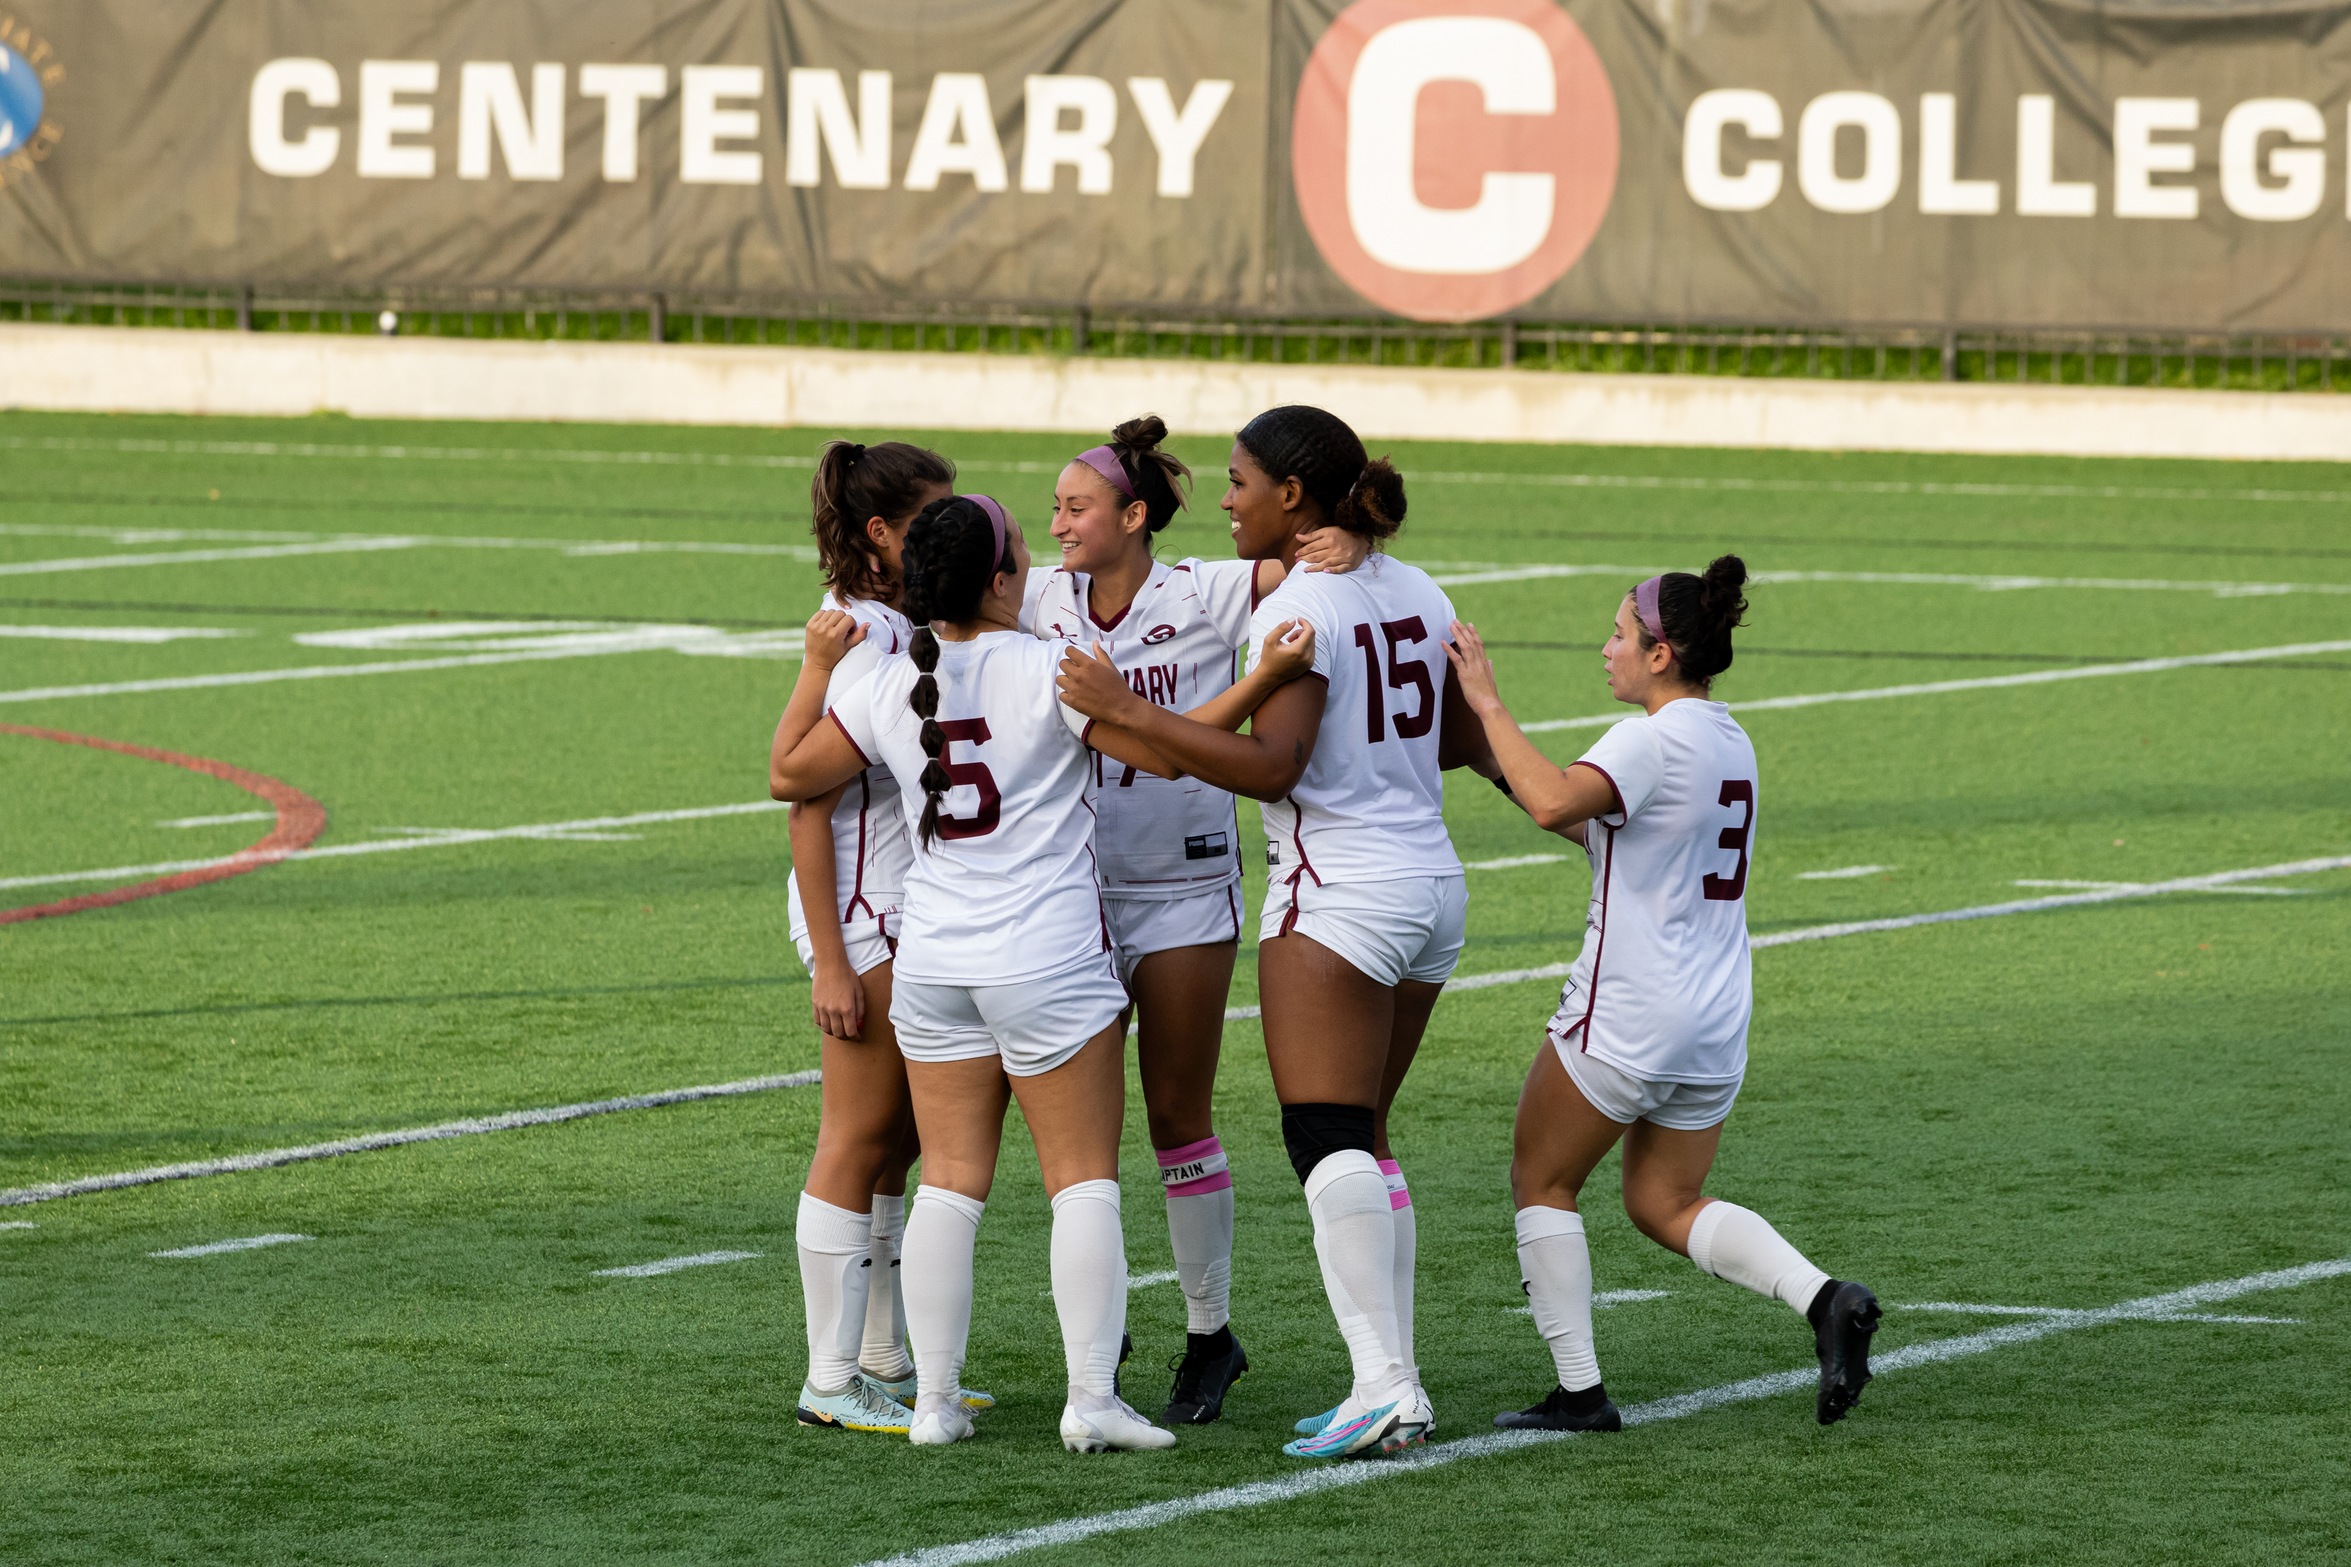 The Ladies will face Schreiner and Trinity on the road this weekend.